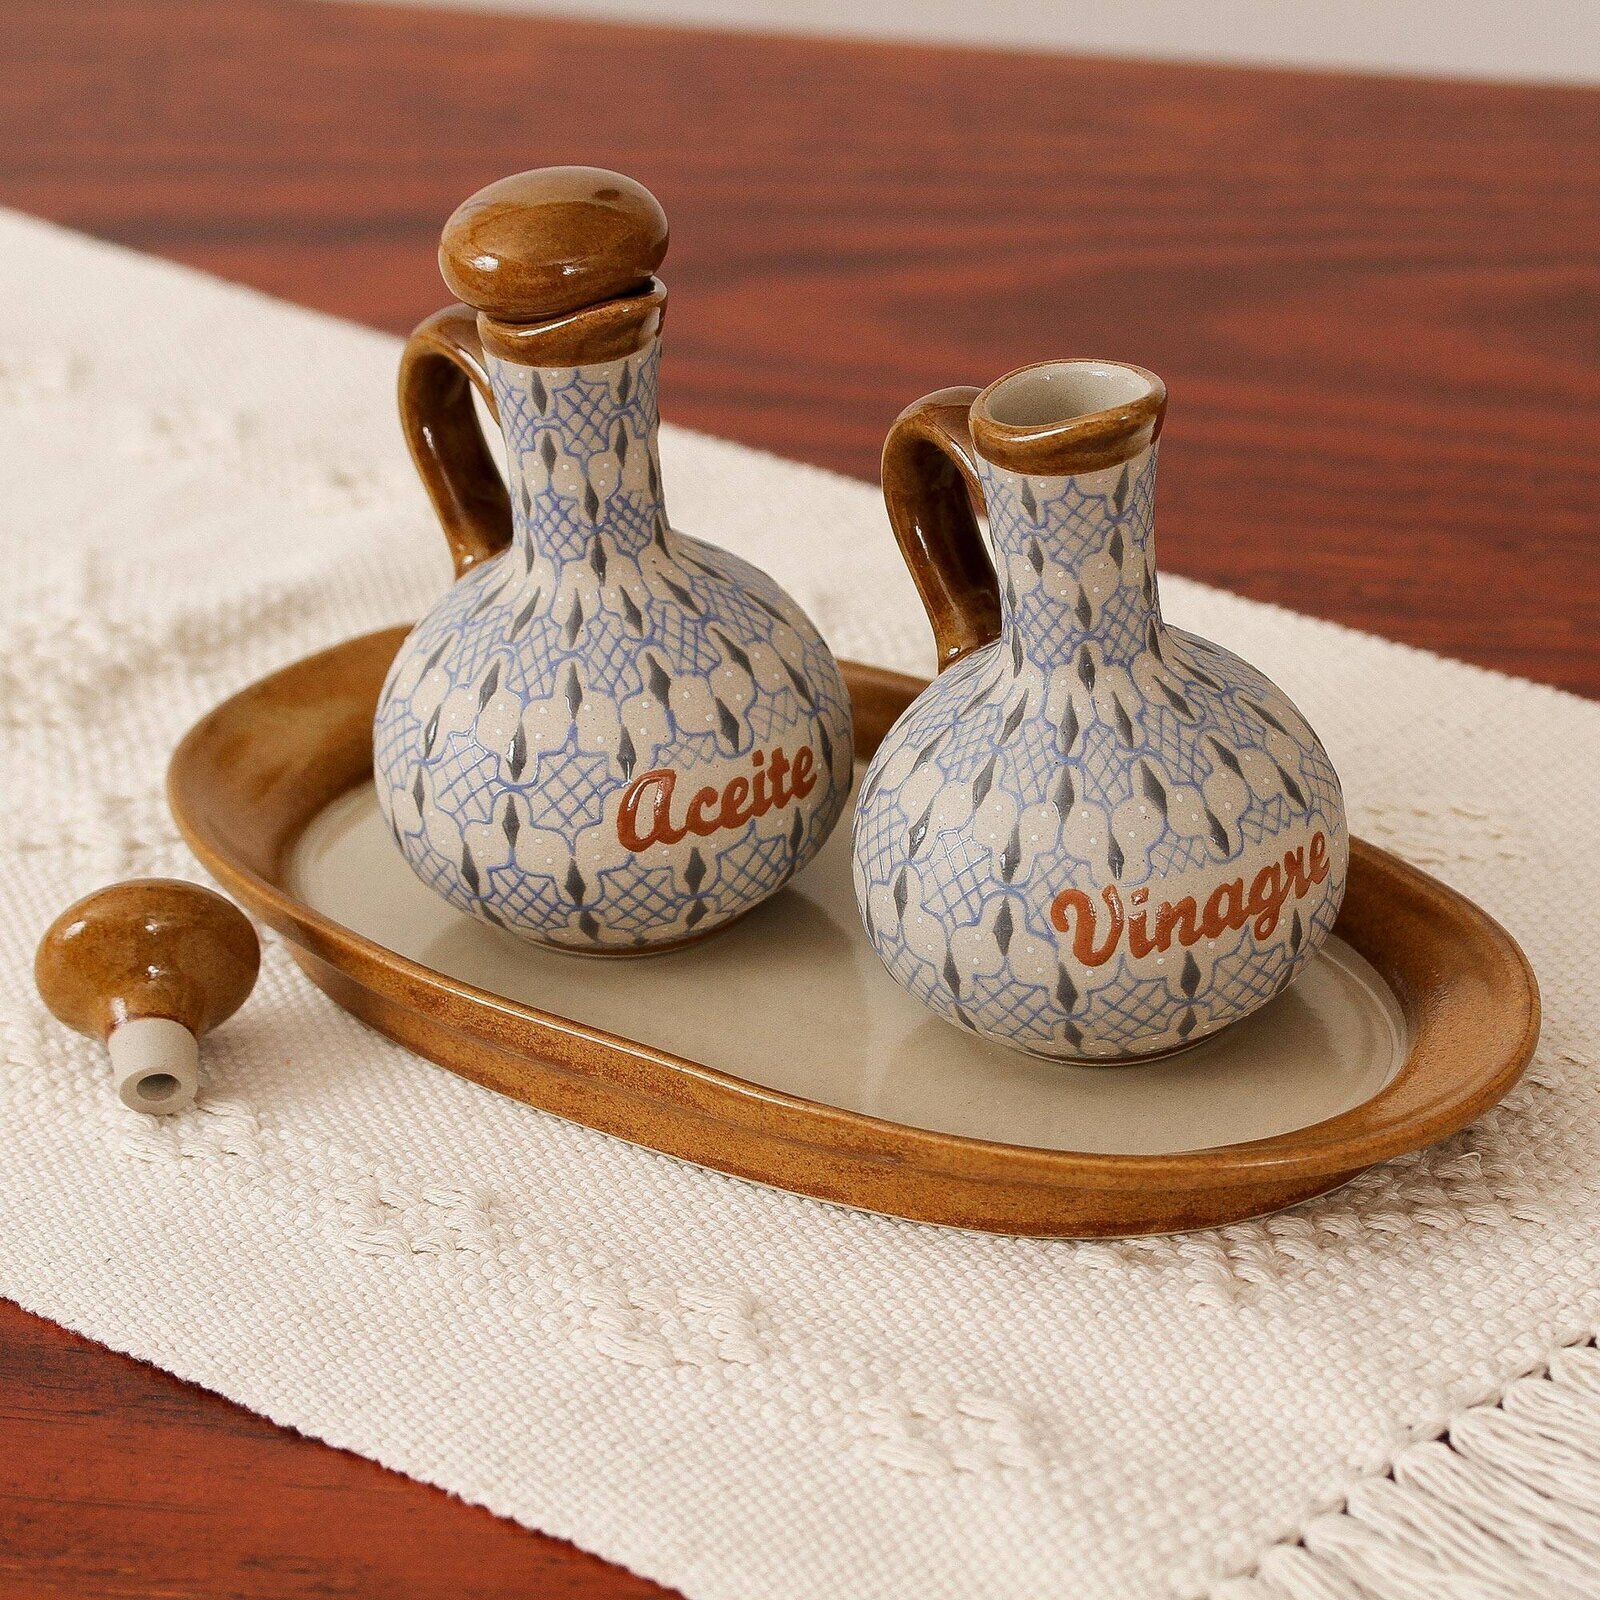 Hand crafted decorative oil bottles